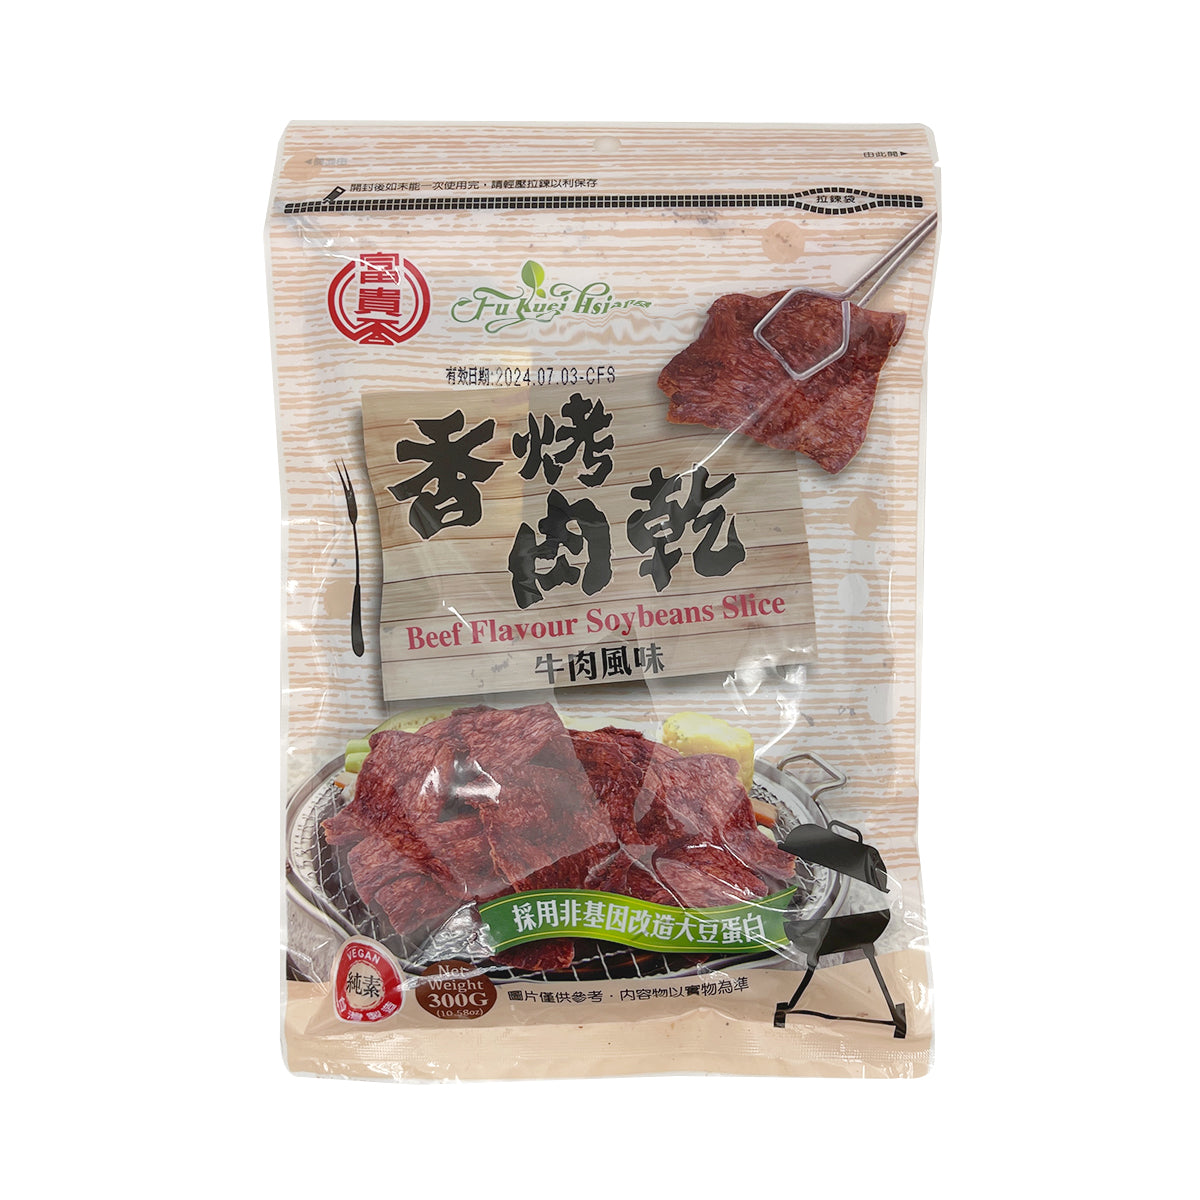 【FU KUEI HSIANG】 Beef Flavour Soybeans Slice (vegan) 300g